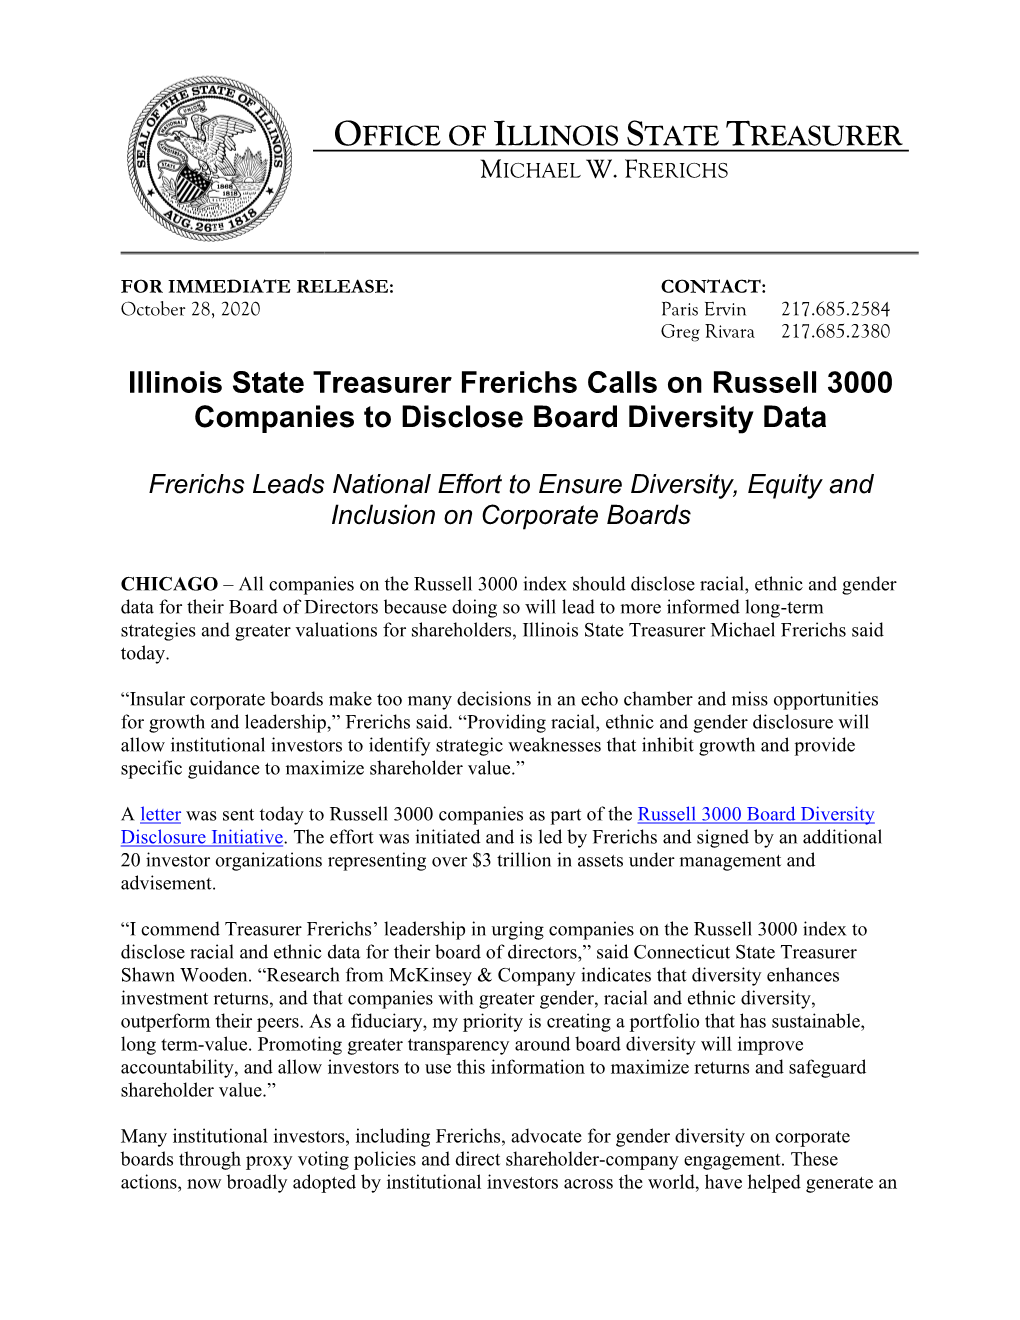 Illinois State Treasurer Frerichs Calls on Russell 3000 Companies to Disclose Board Diversity Data